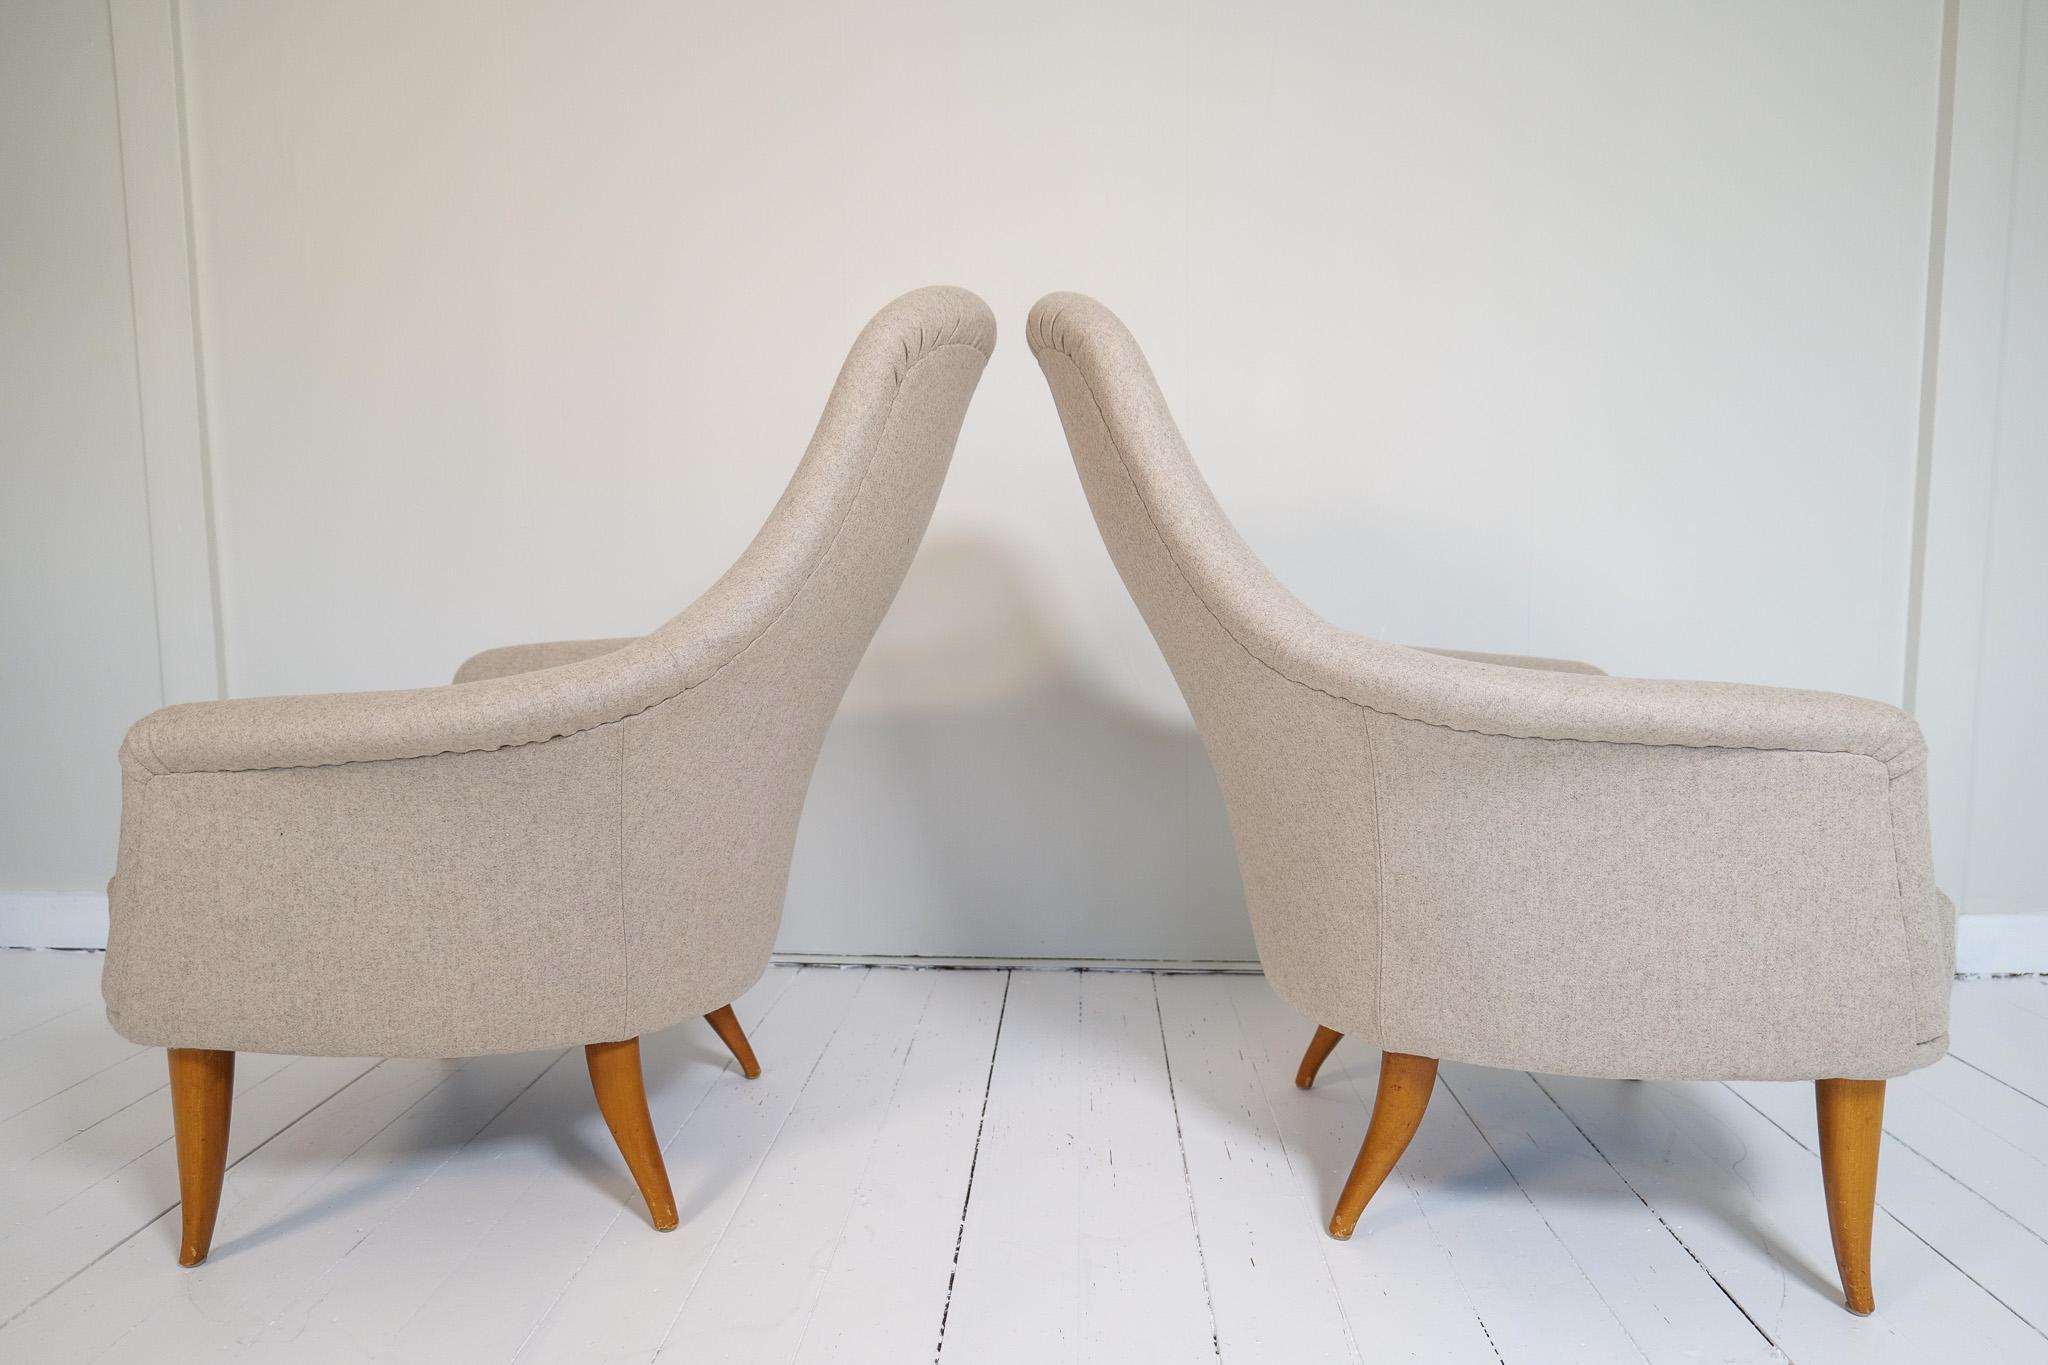 Midcentury Modern Big Adam Lounge Chairs NK, Sweden, 1950s For Sale 4